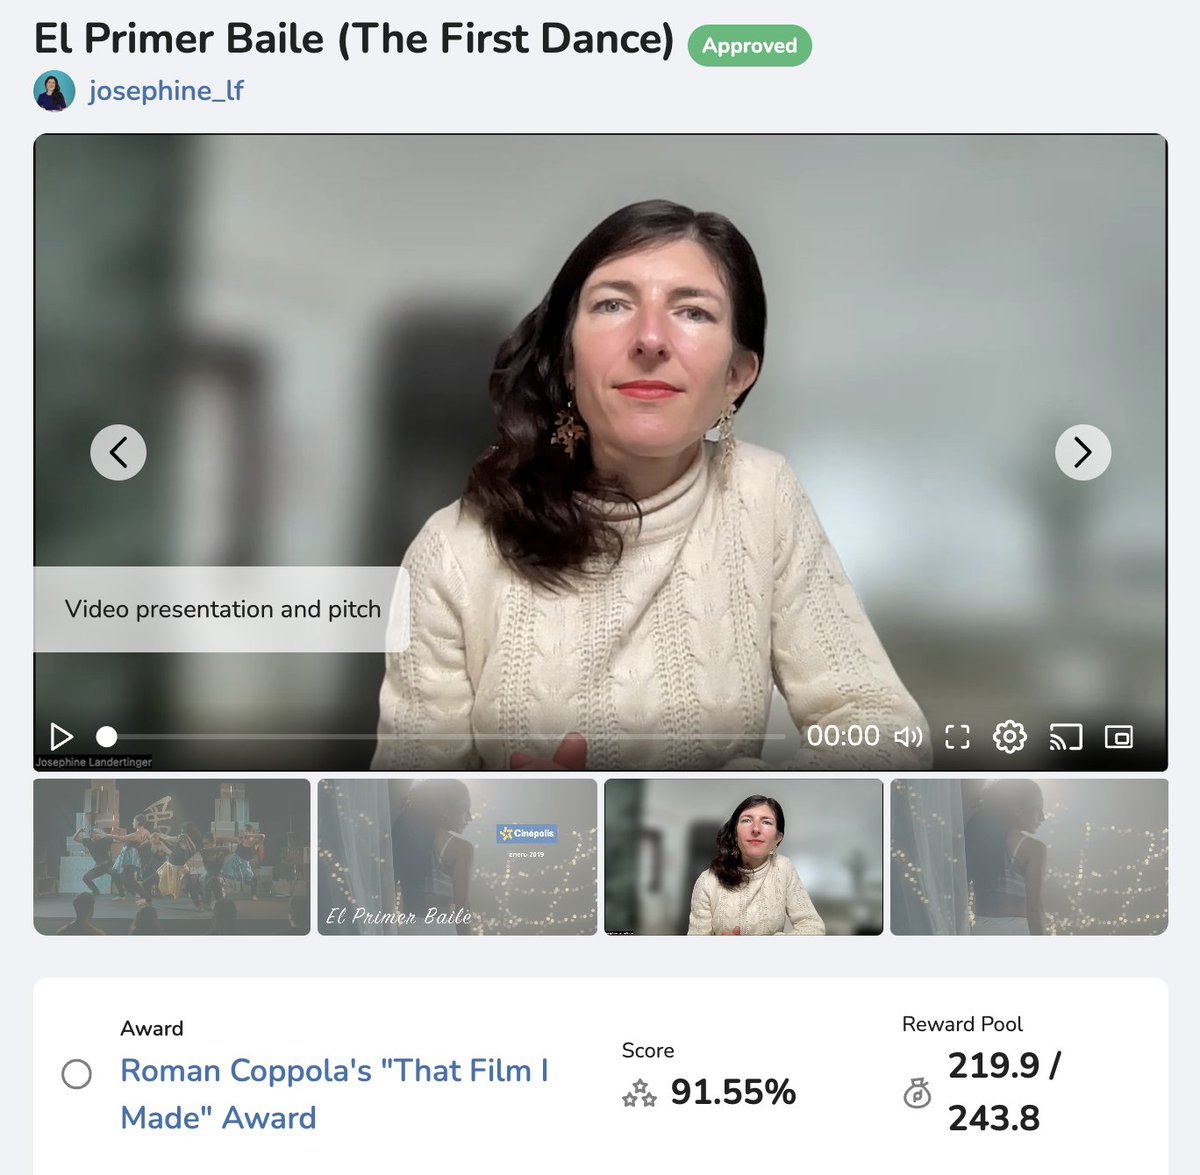 Have you watched my short film 'El Primer Baile' and listened to my pitch? It's a chance to get to know me better and also help me achieve the next step in my career - working on a film with Roman Coppola. Will you vote for me 😍?app.decentralized.pictures/proposal/6585a…  #femalefilmmakers #film3